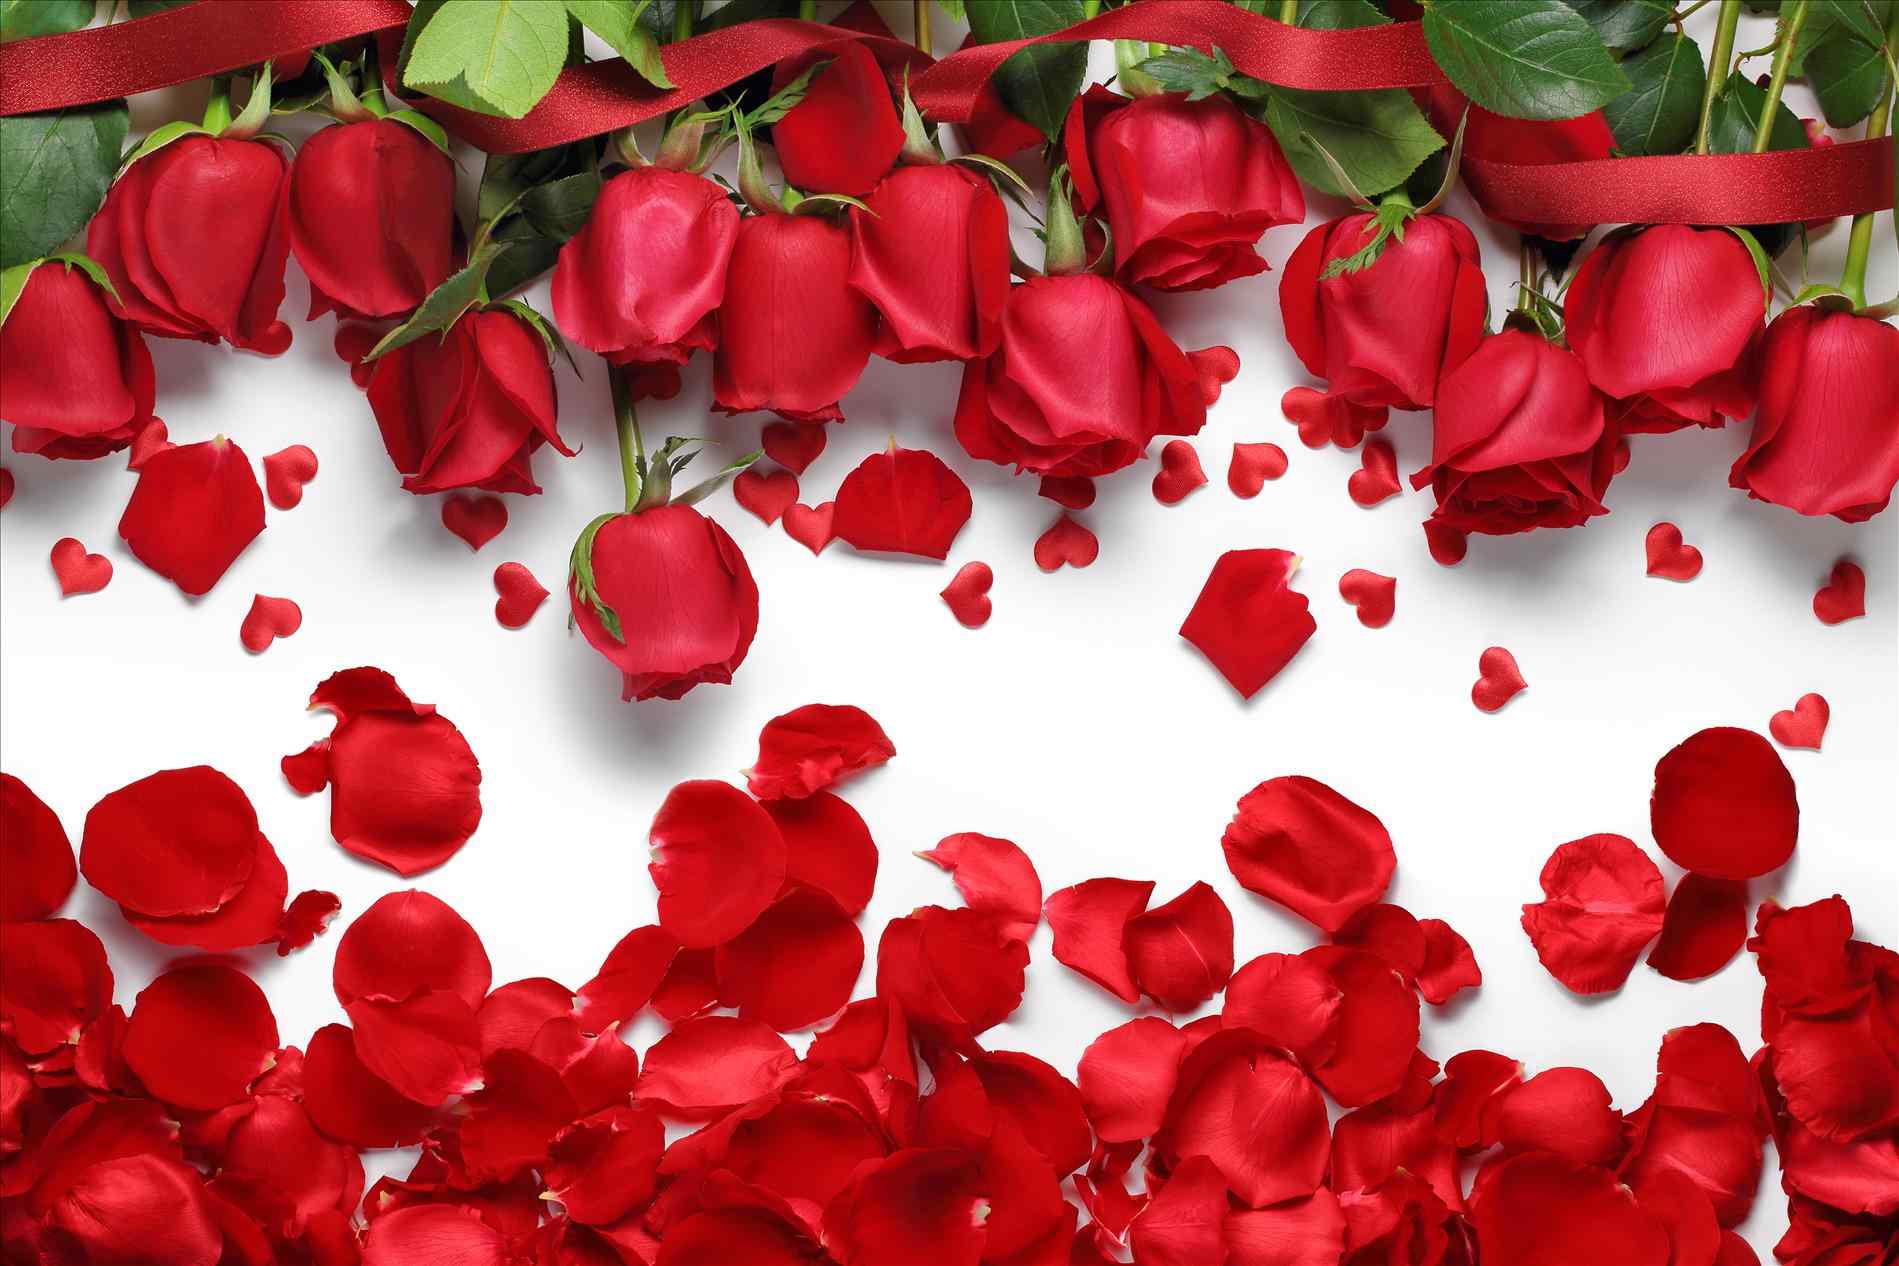 Red And White Rose Wallpapers - Wallpaper Cave